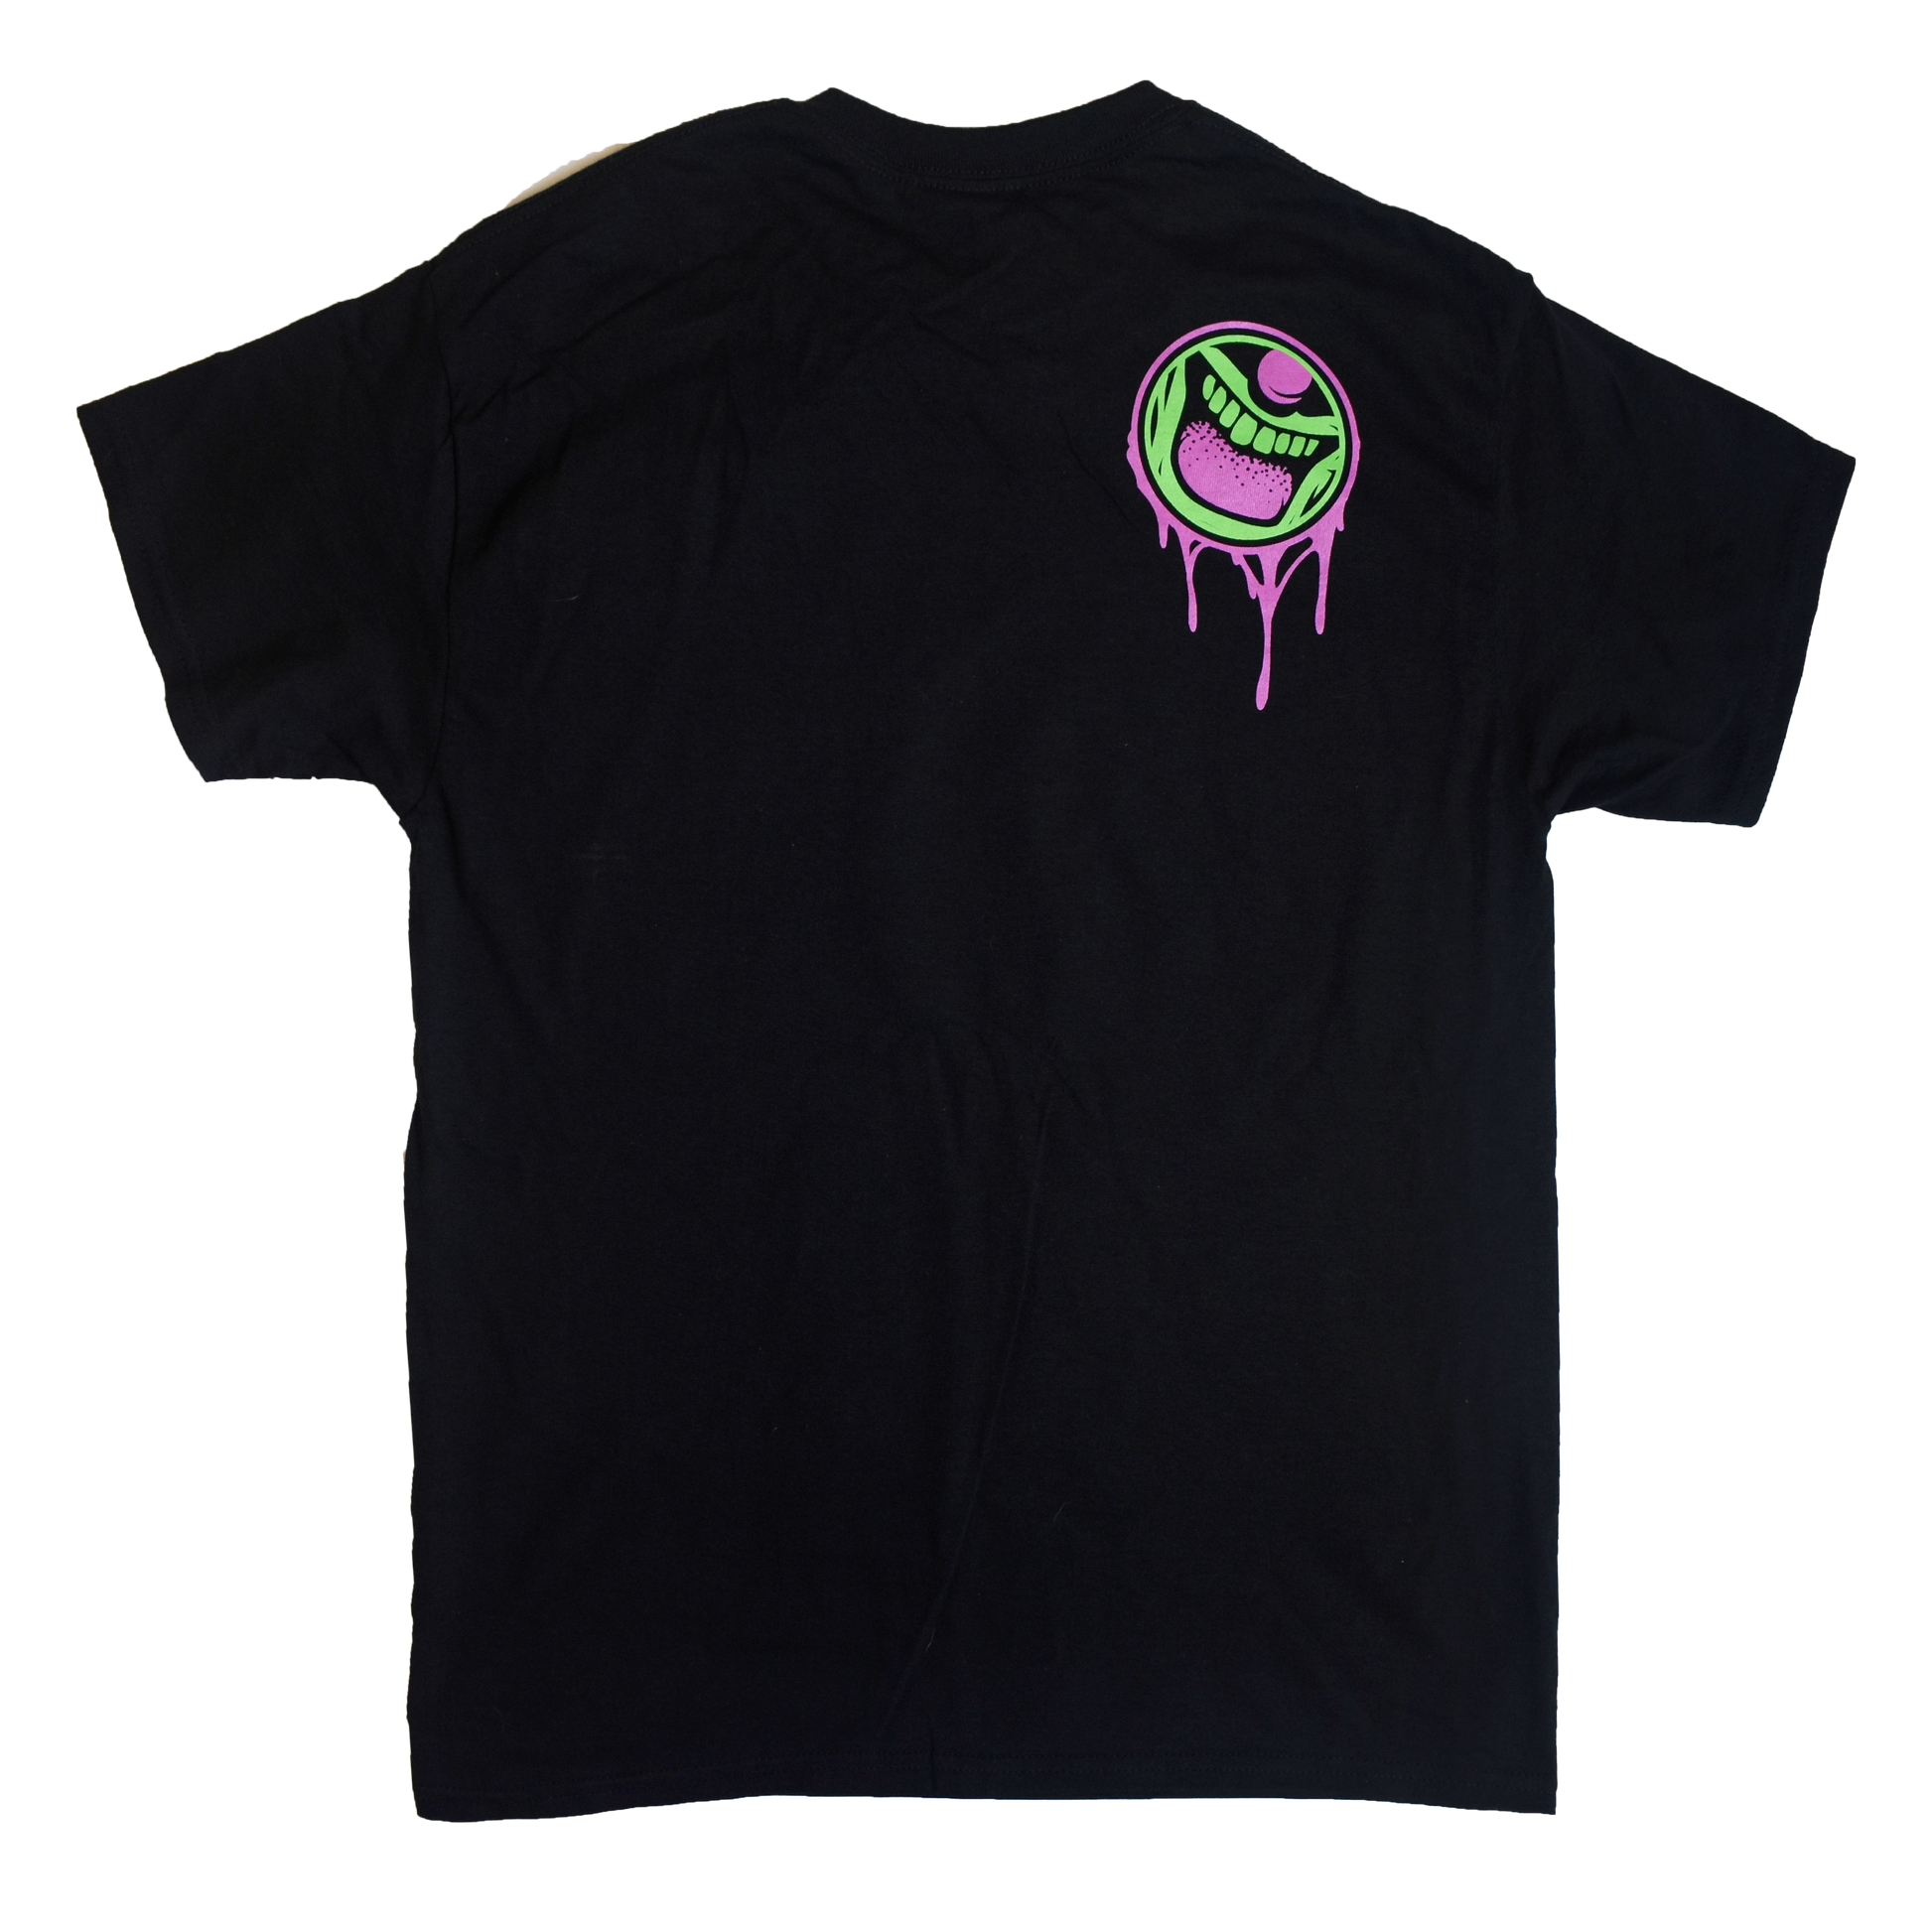 Spiderella Tee - Glow in the Dark back view